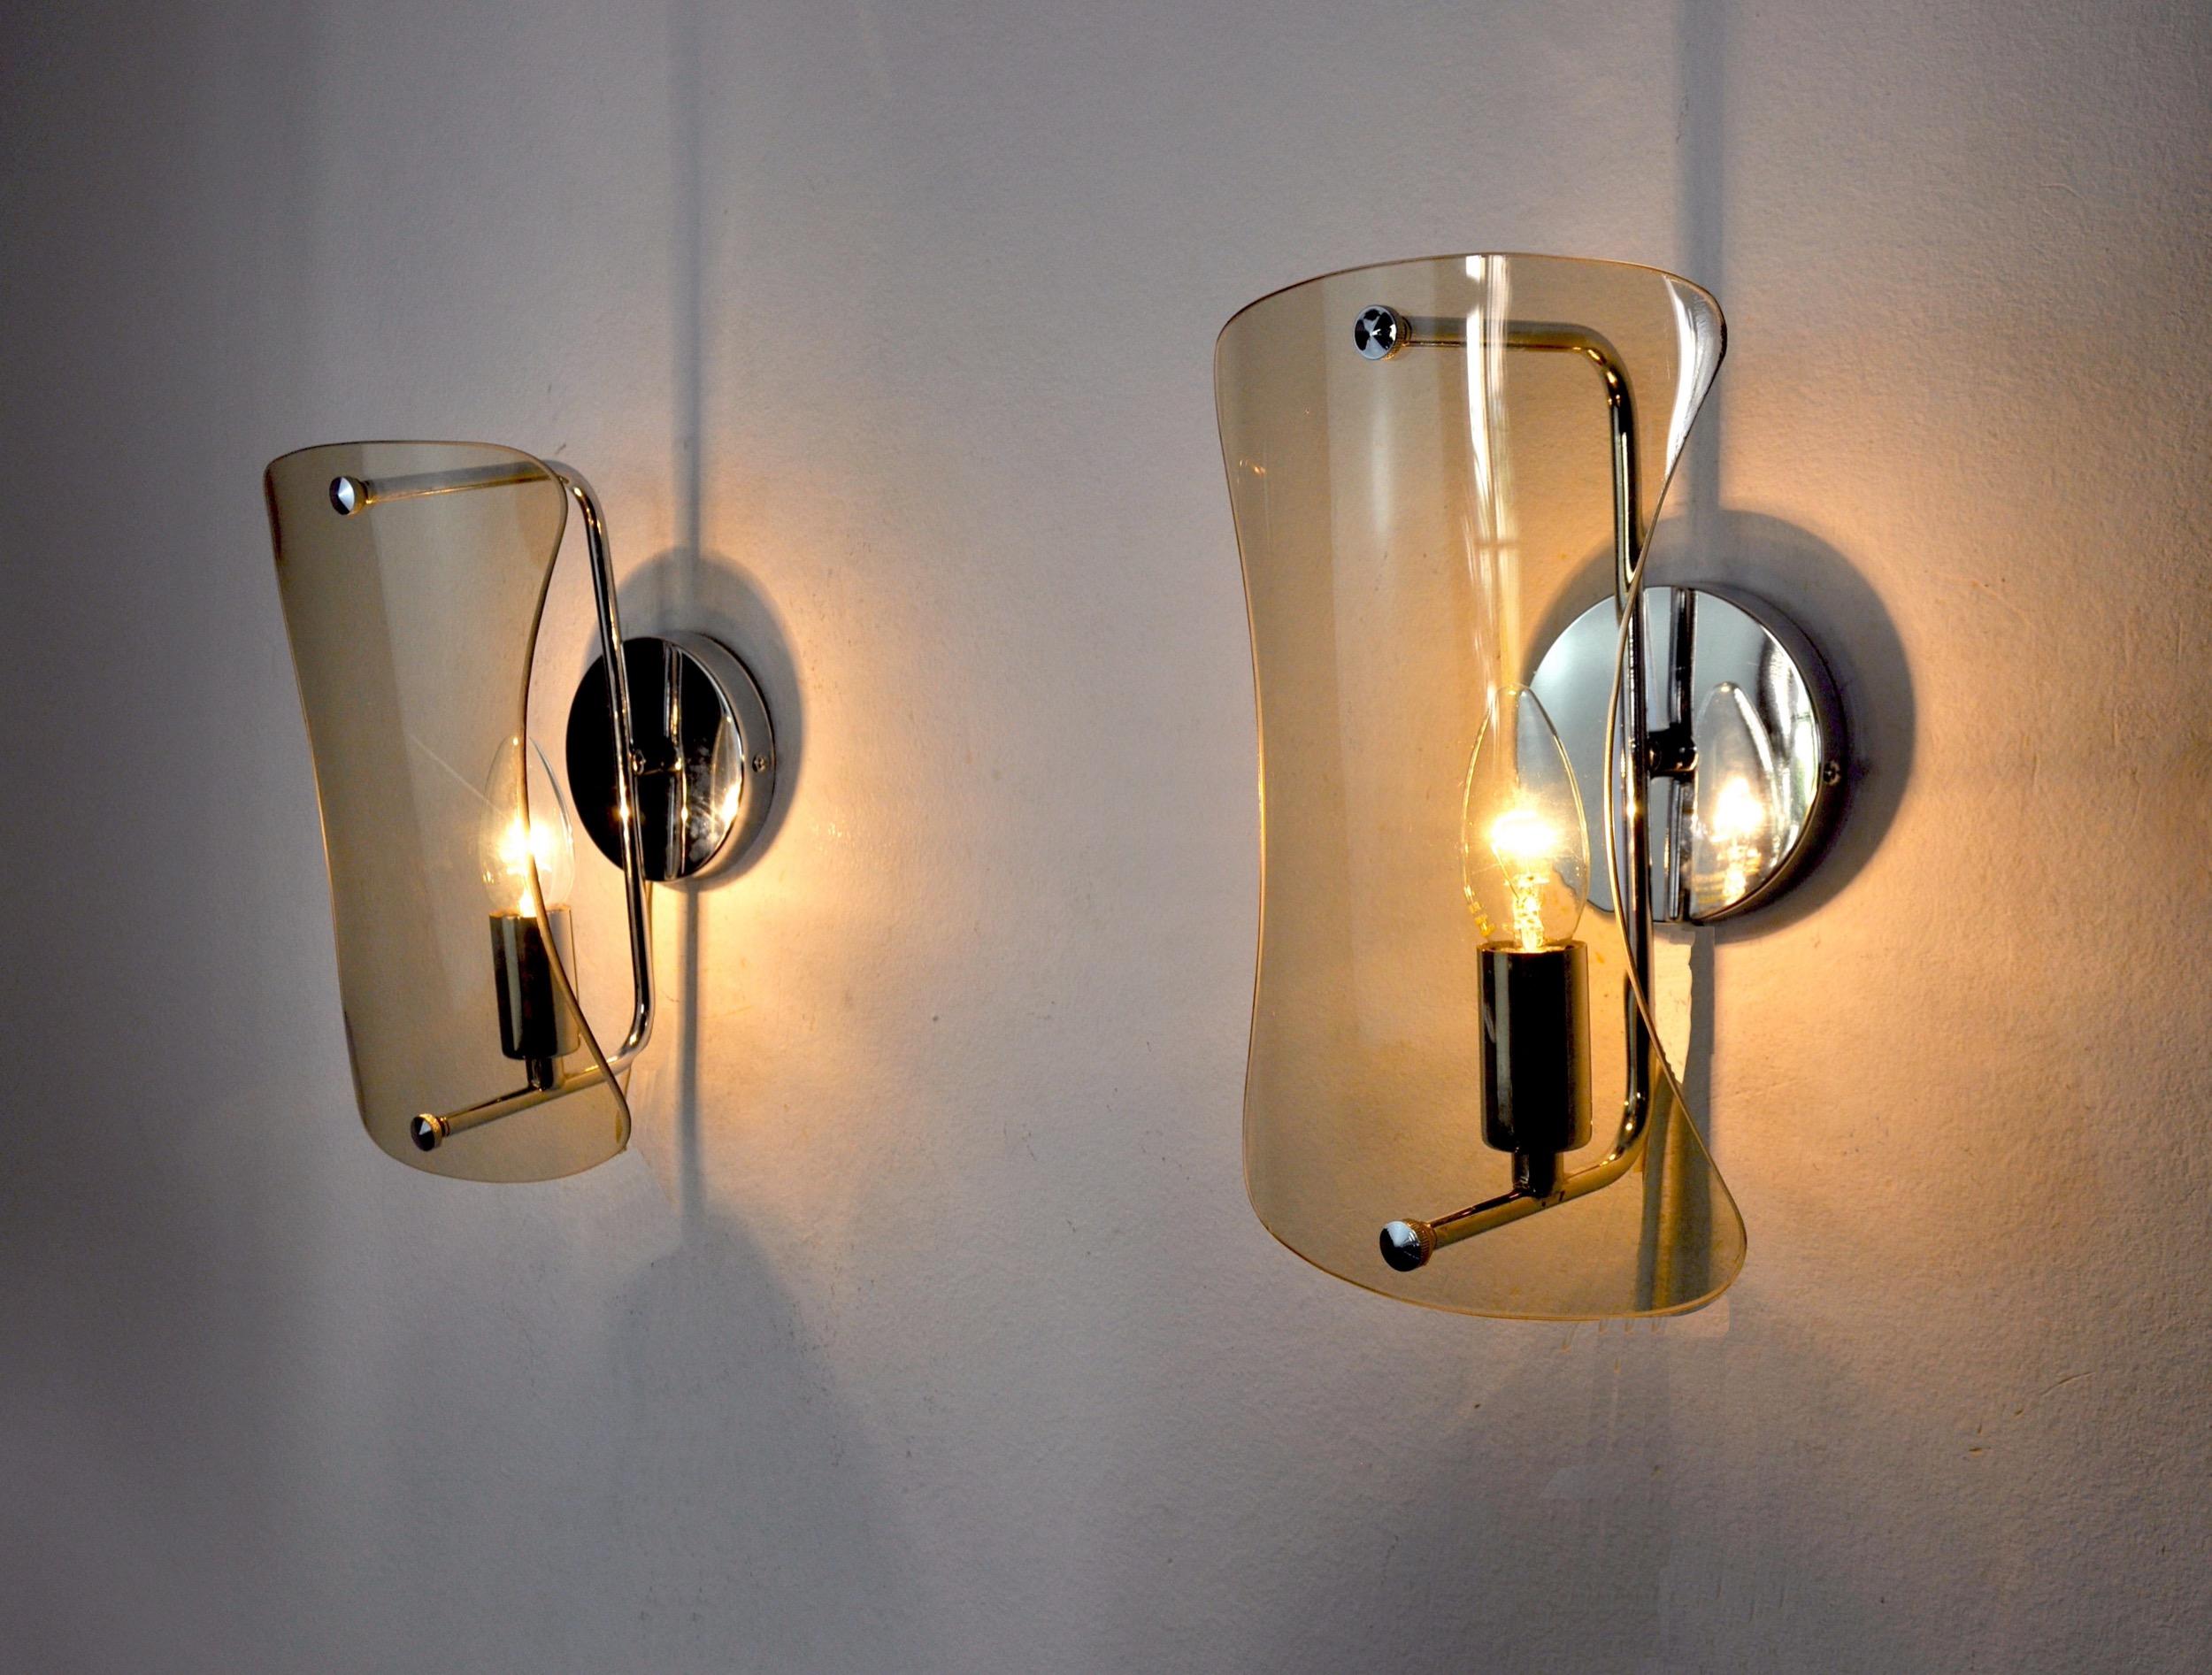 Very nice pair of veca wall lamps produced in italy in the 70s.

Wall lamps composed of cut glass plates and a chrome structure.

Unique object that will illuminate wonderfully and bring a real design touch to your interior.

Verified electricity,